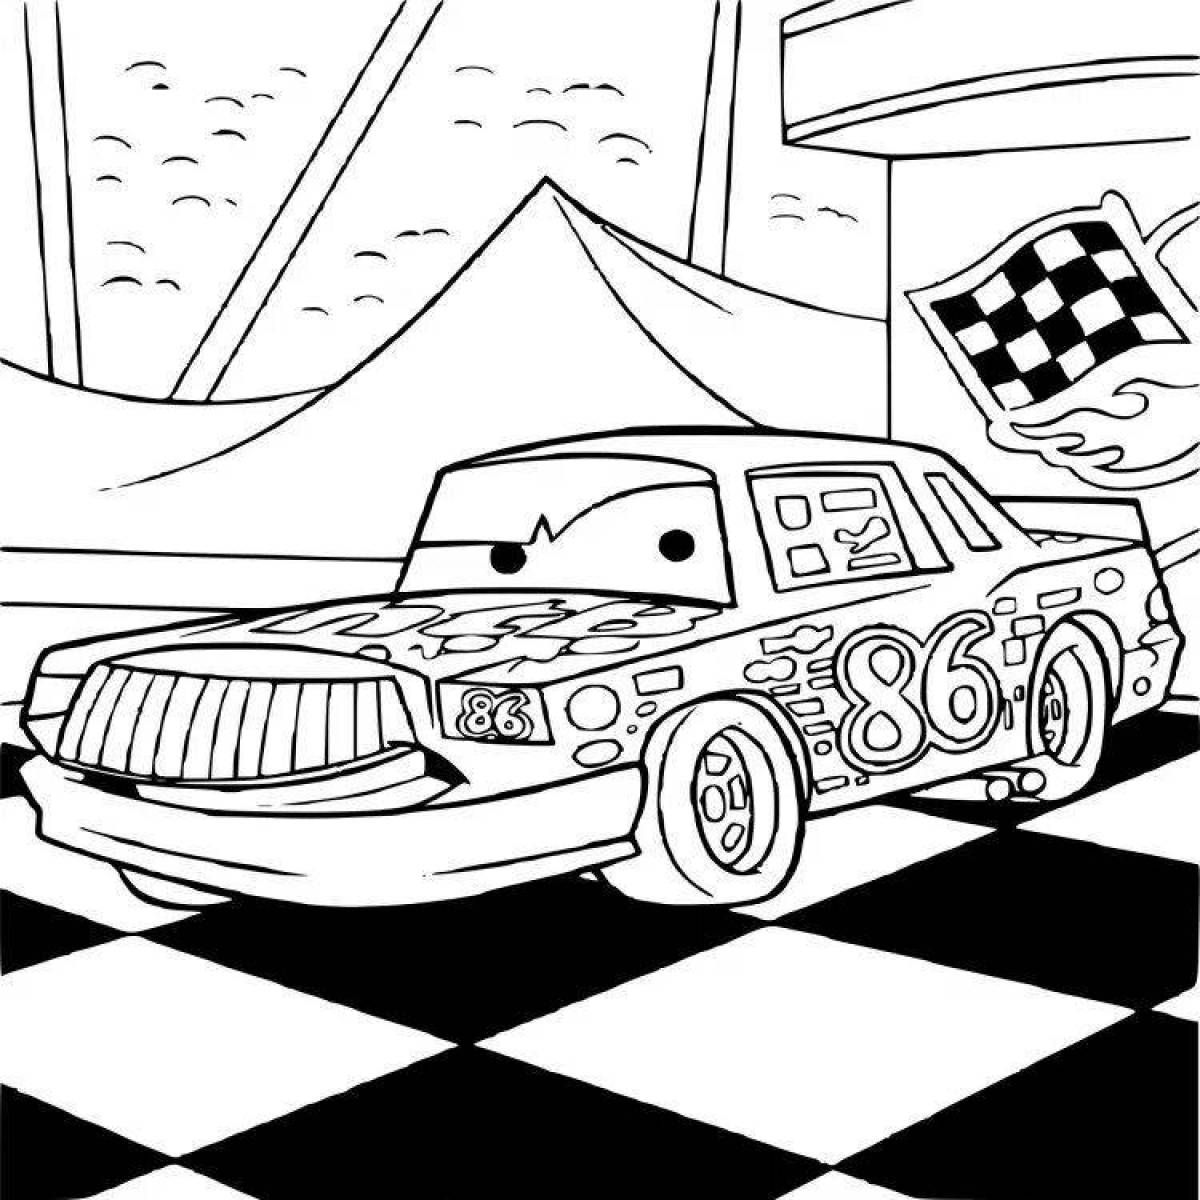 Chico Hicks coloring page